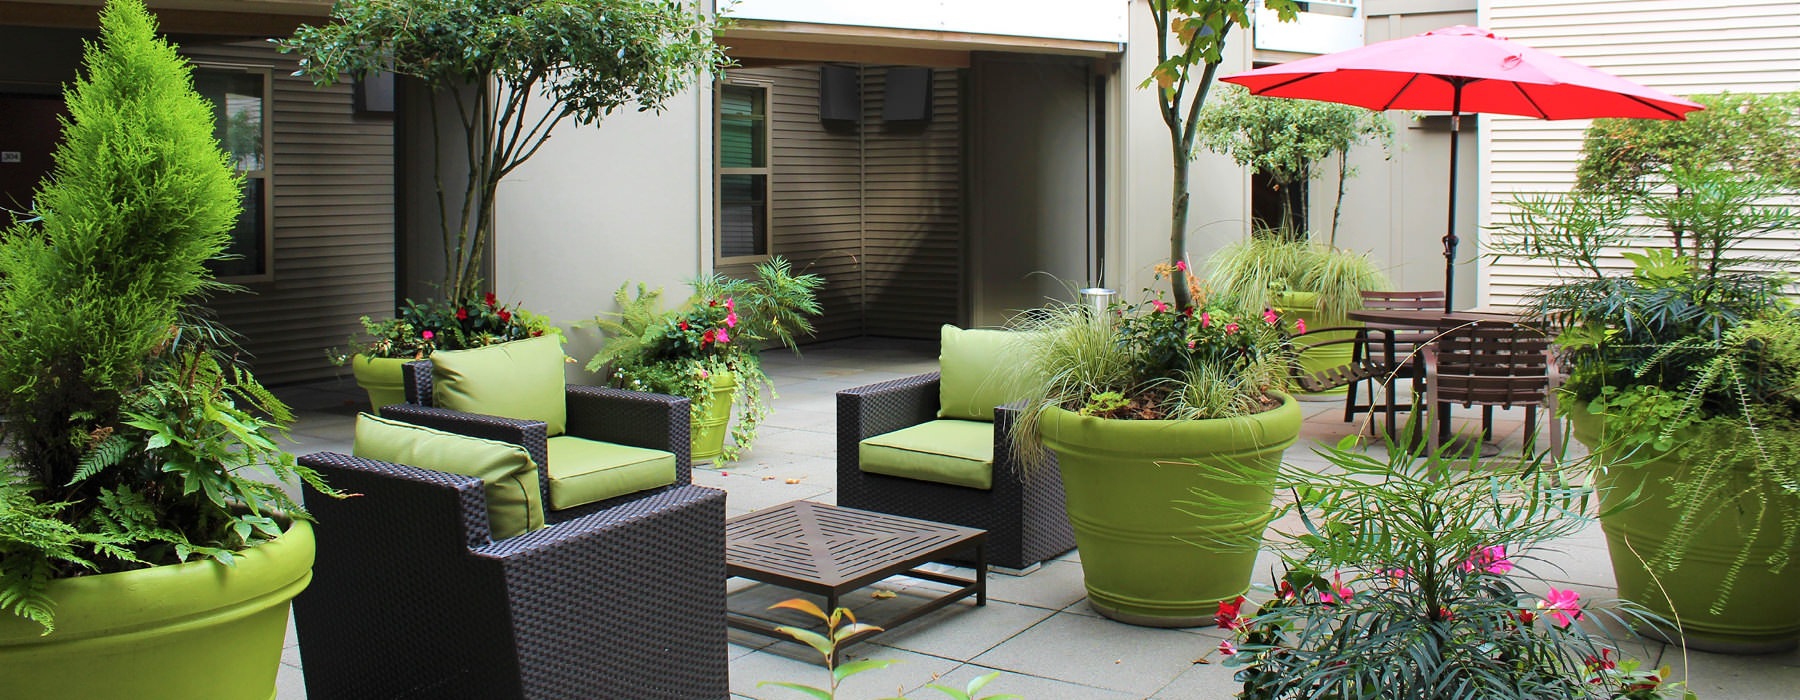 courtyard with patio furniture, large potted plants and trees